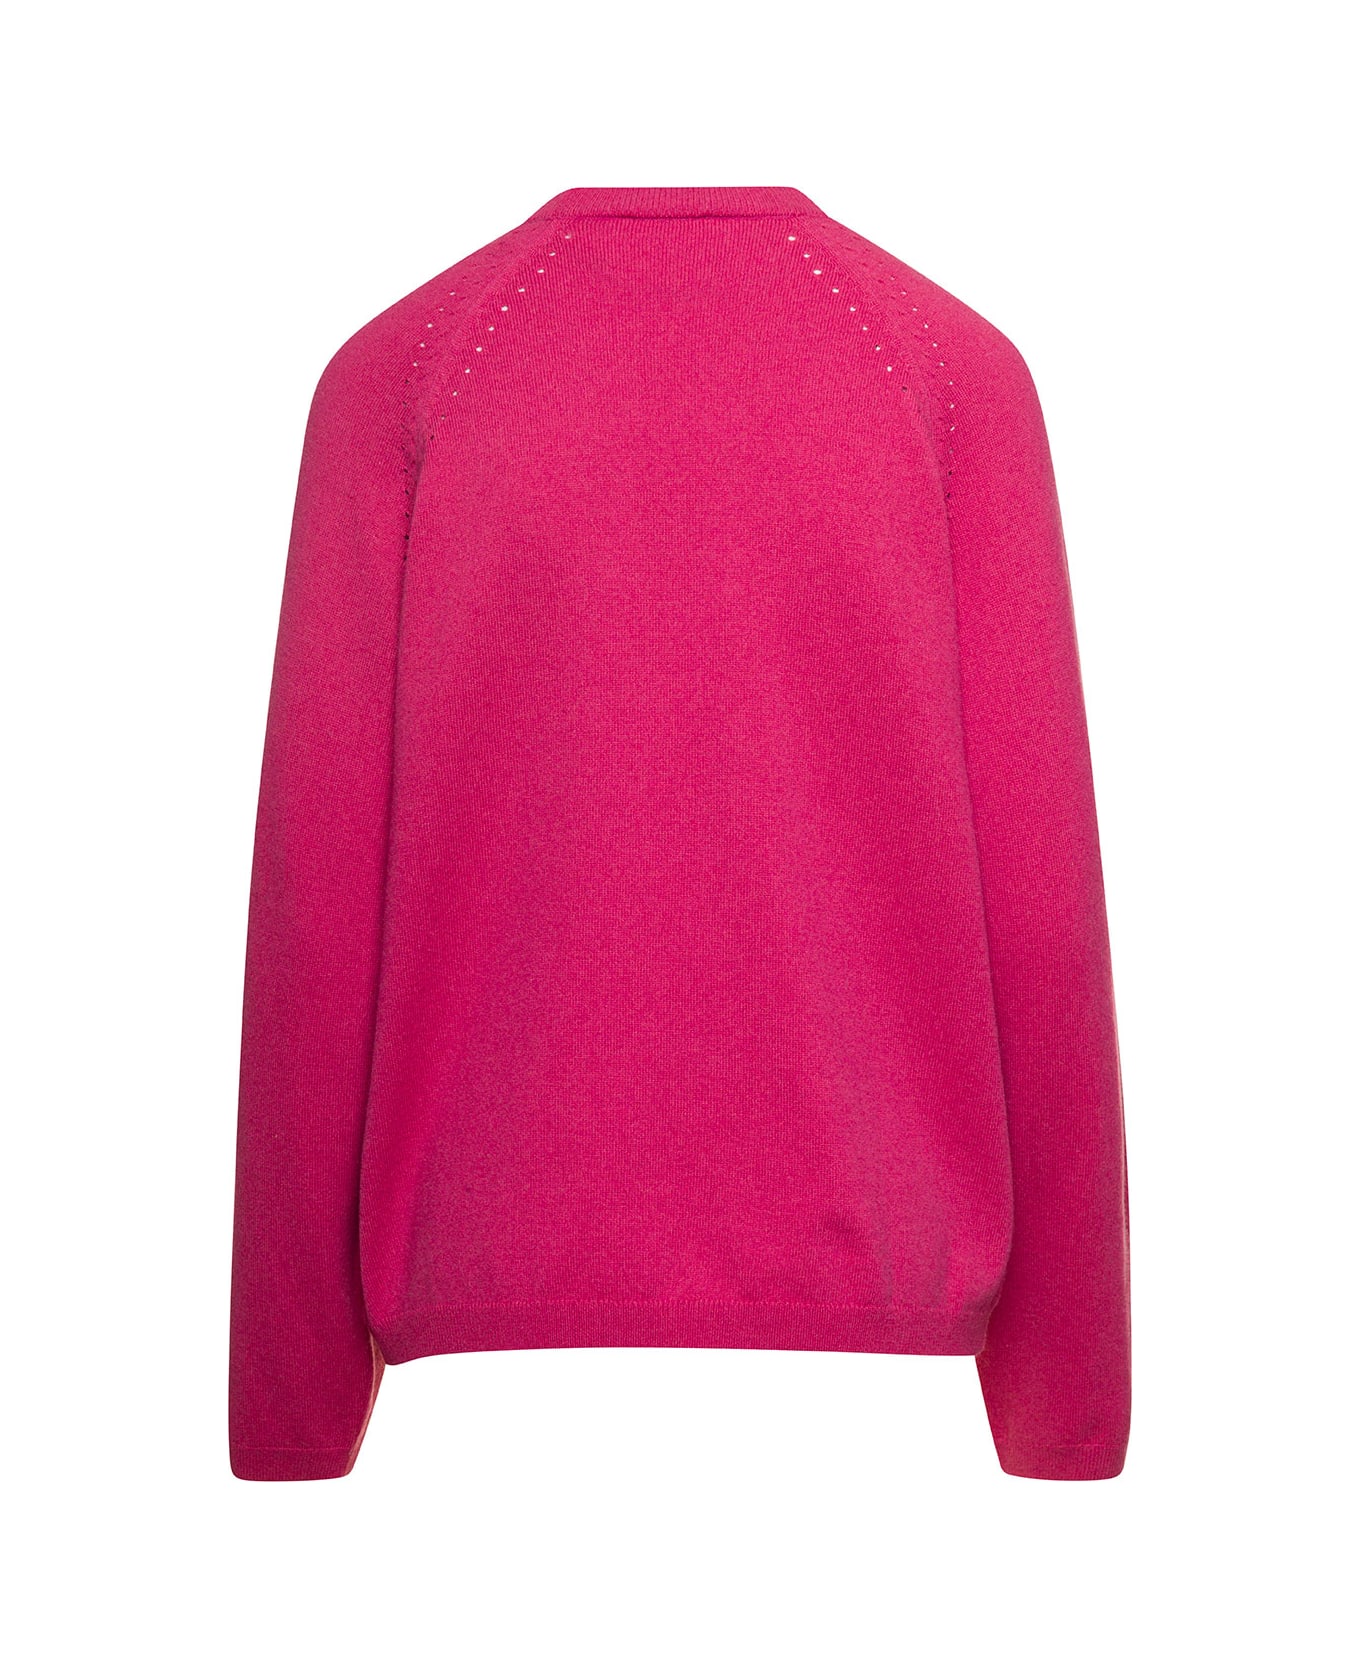 A.P.C. 'rosanna' Fuchsia Crewneck Sweater With Perforated Details In Cotton And Cashmere Woman - Fuxia ニットウェア